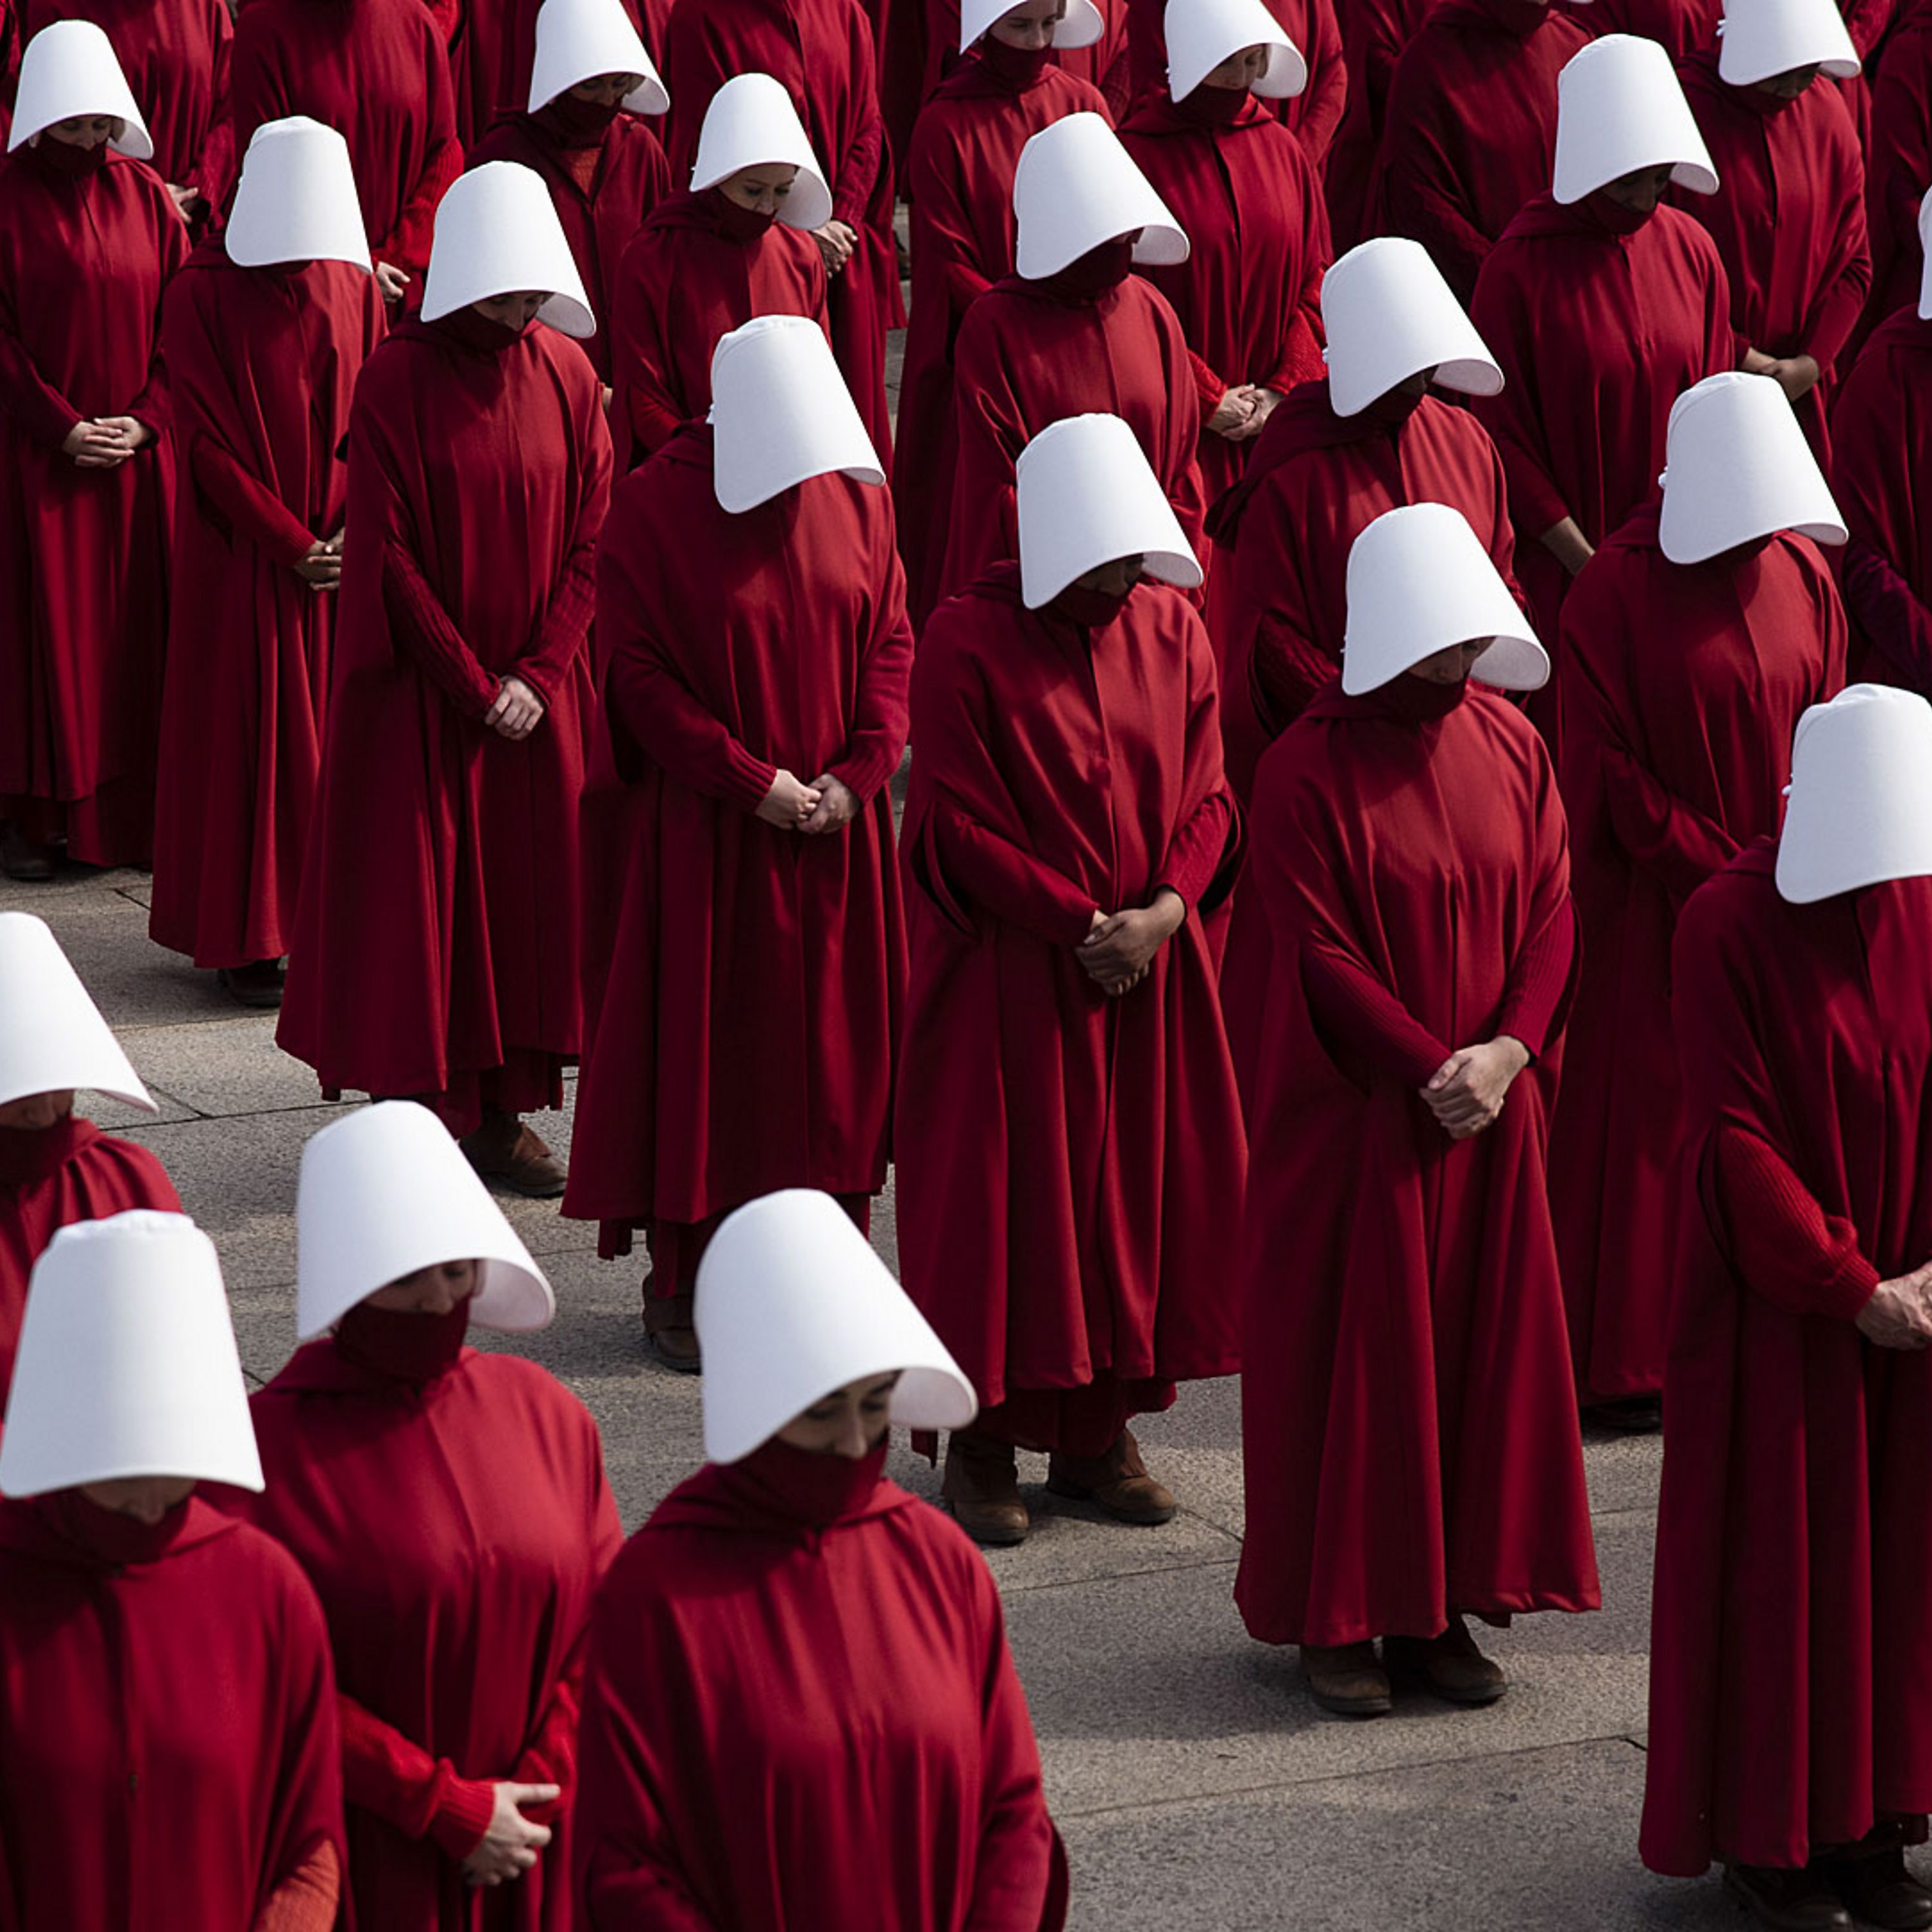 Global infertility: Could The Handmaid’s Tale become reality?